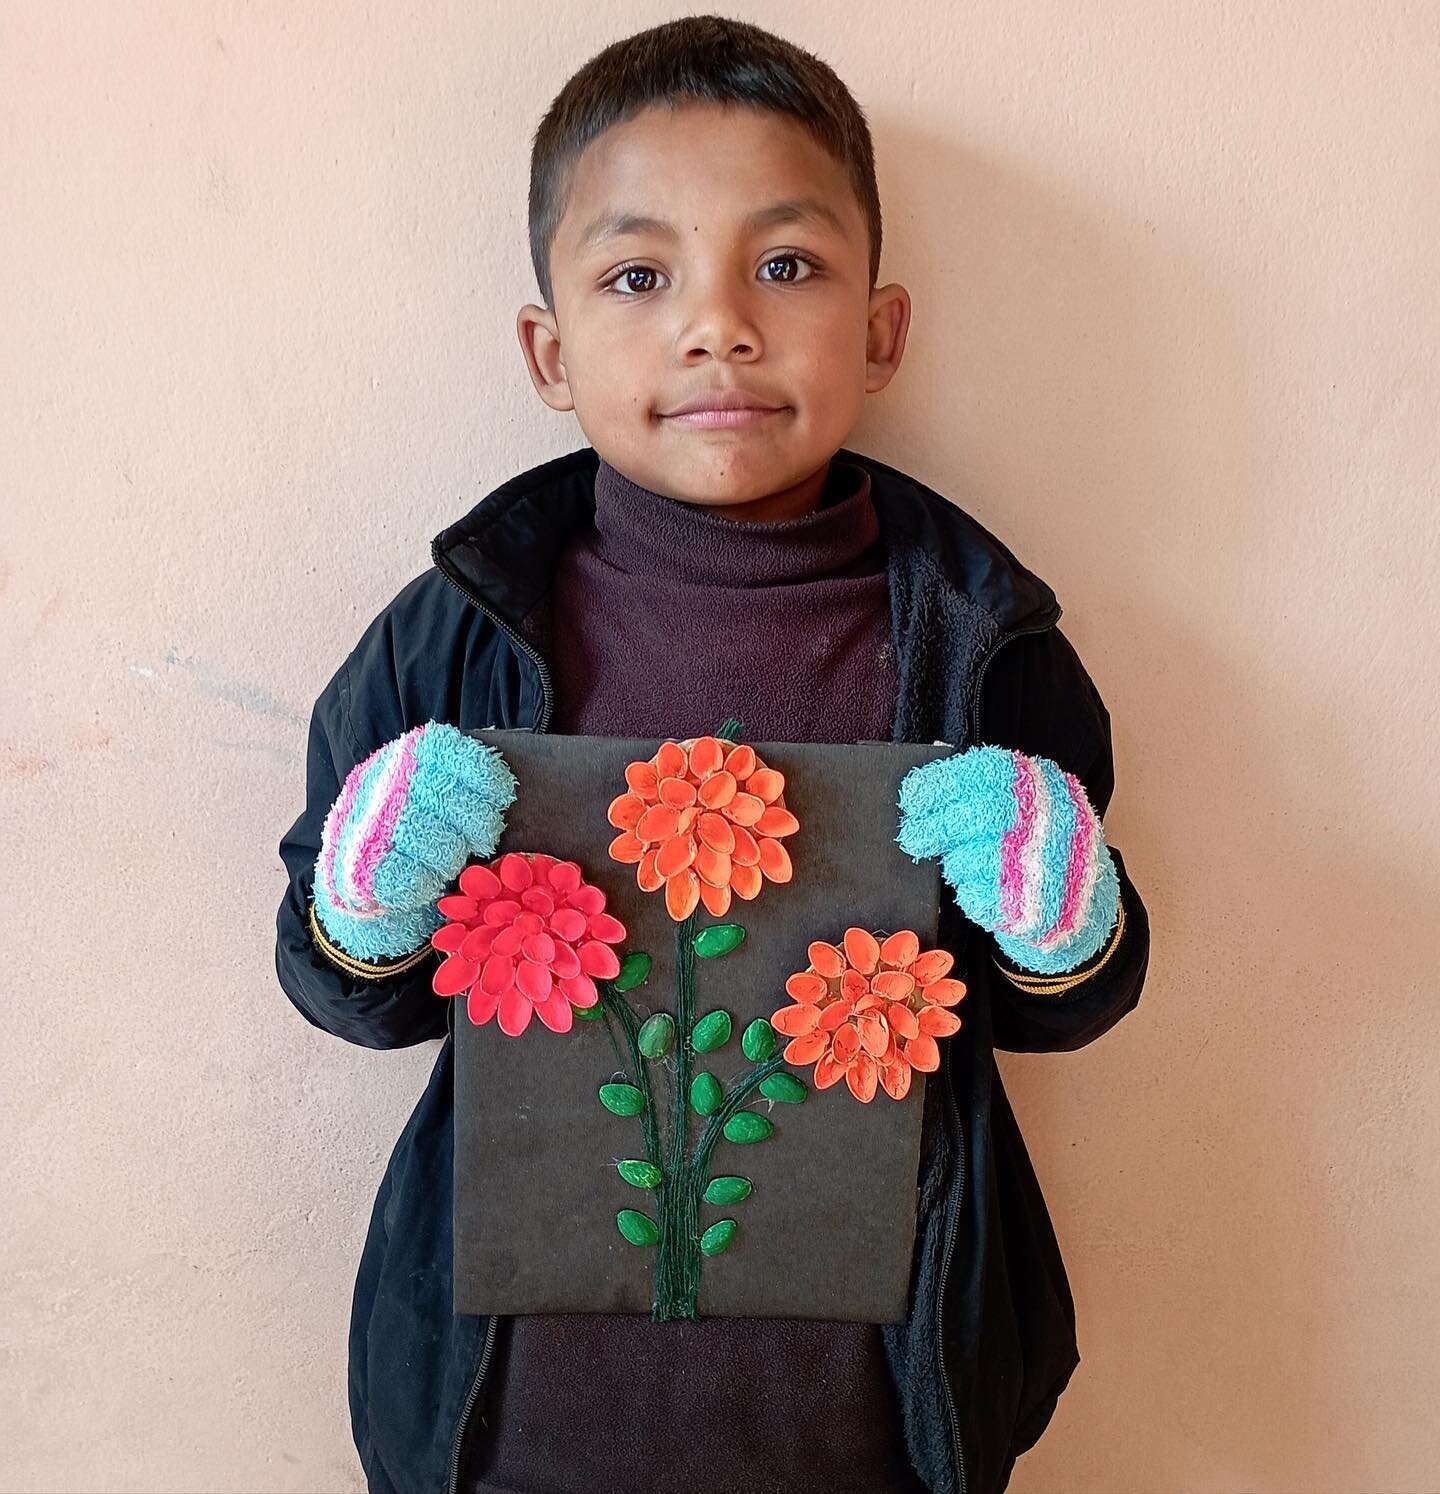 How many of Nepal's national symbols do you know?

🇳🇵Students found creative ways to display a few of the many things that make Nepal unique! 

#nepal #nepali #Globaleducation #educationforall #RighttoEducation #internationaldevelopment #nonprofits